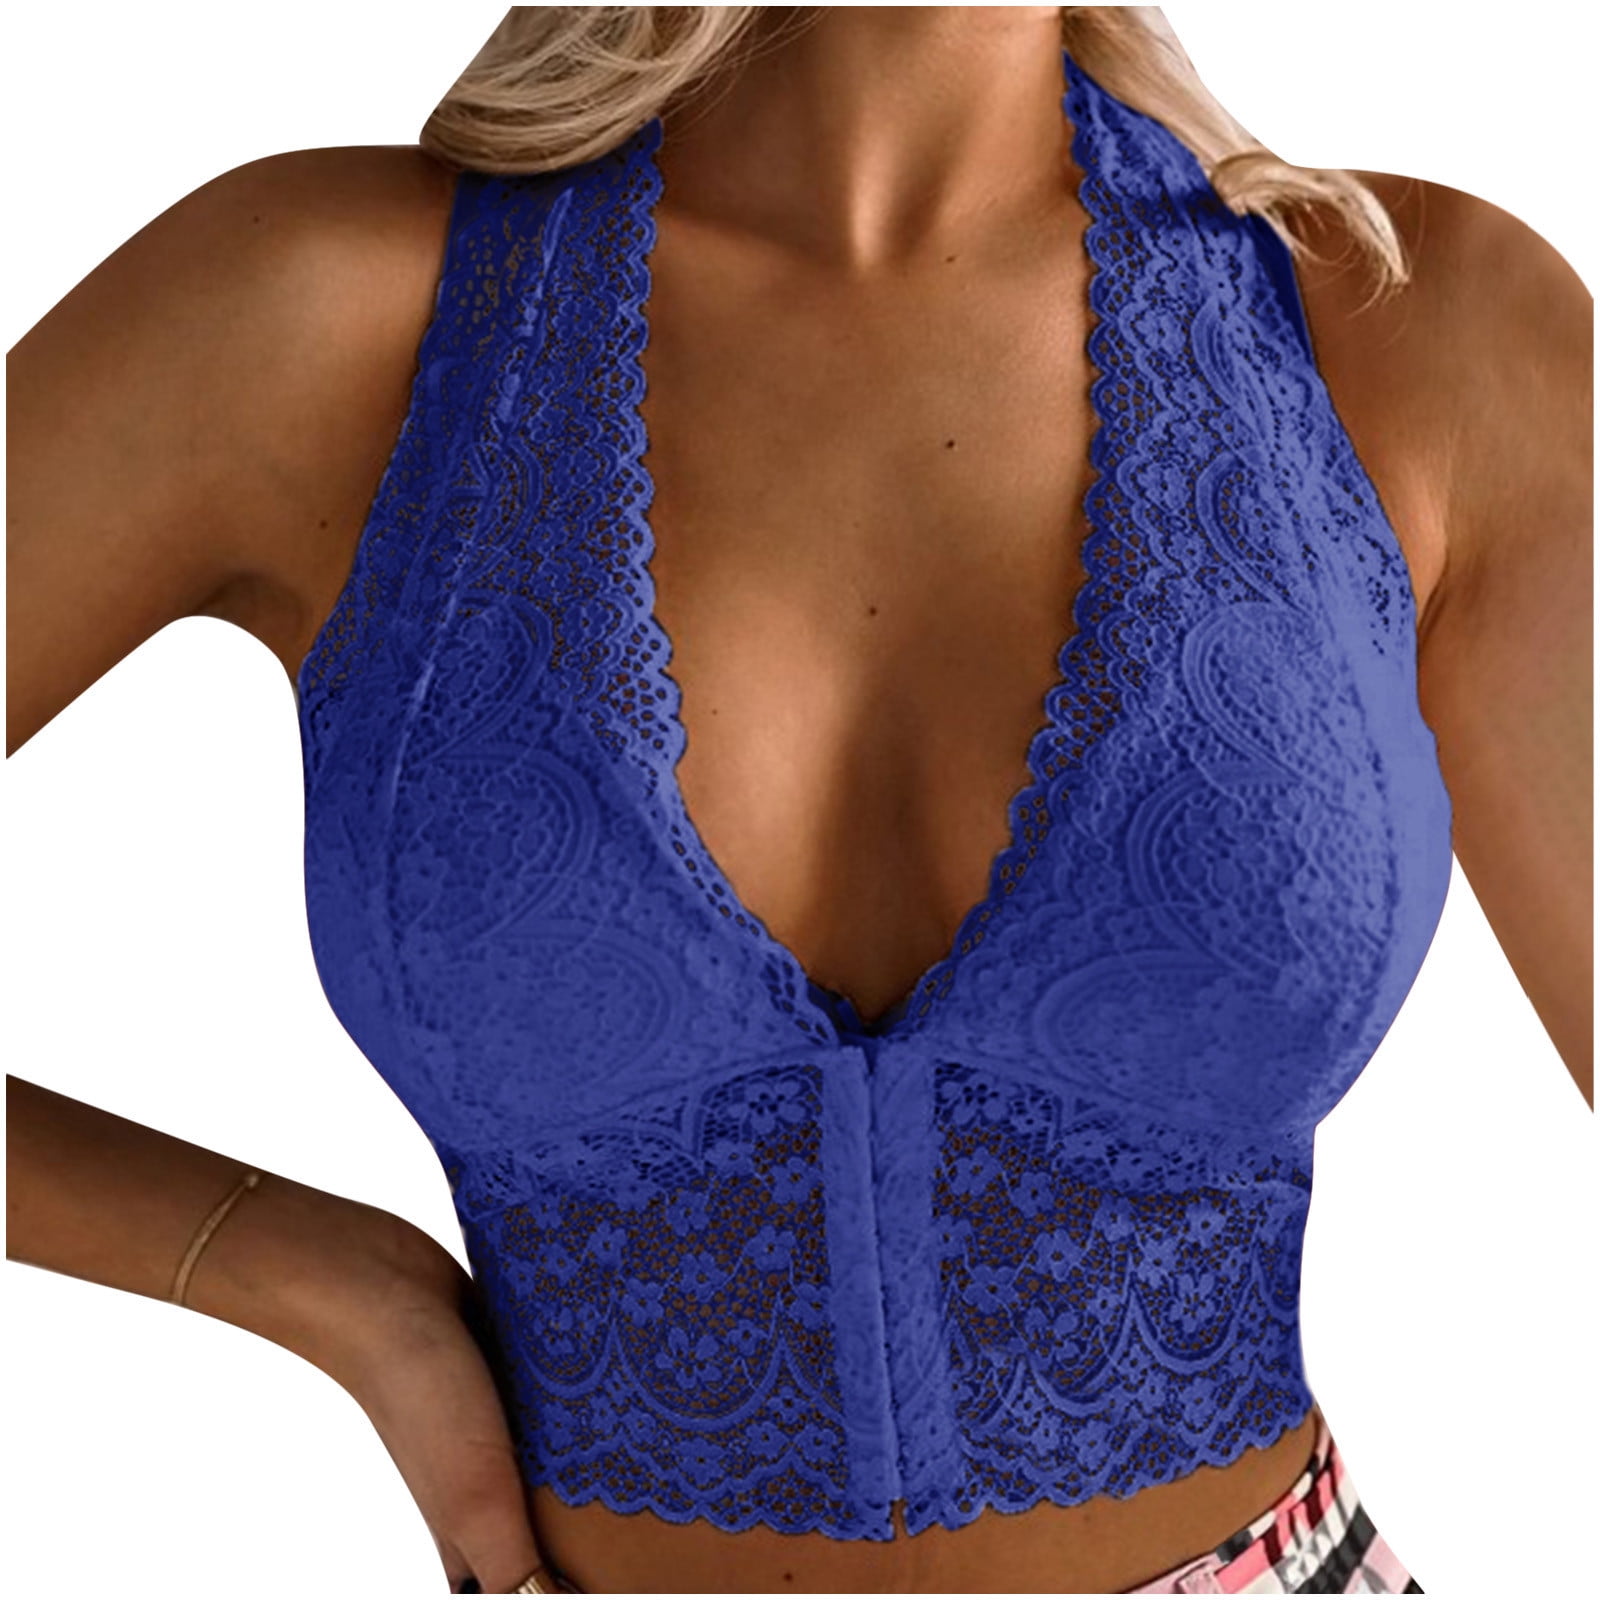 YYDGH Women's High Neck Deep V Lace Bralette Padded Lace Wireless Halter Bra  Hollow Out Floral Crop Top Vest Bra Blue L 